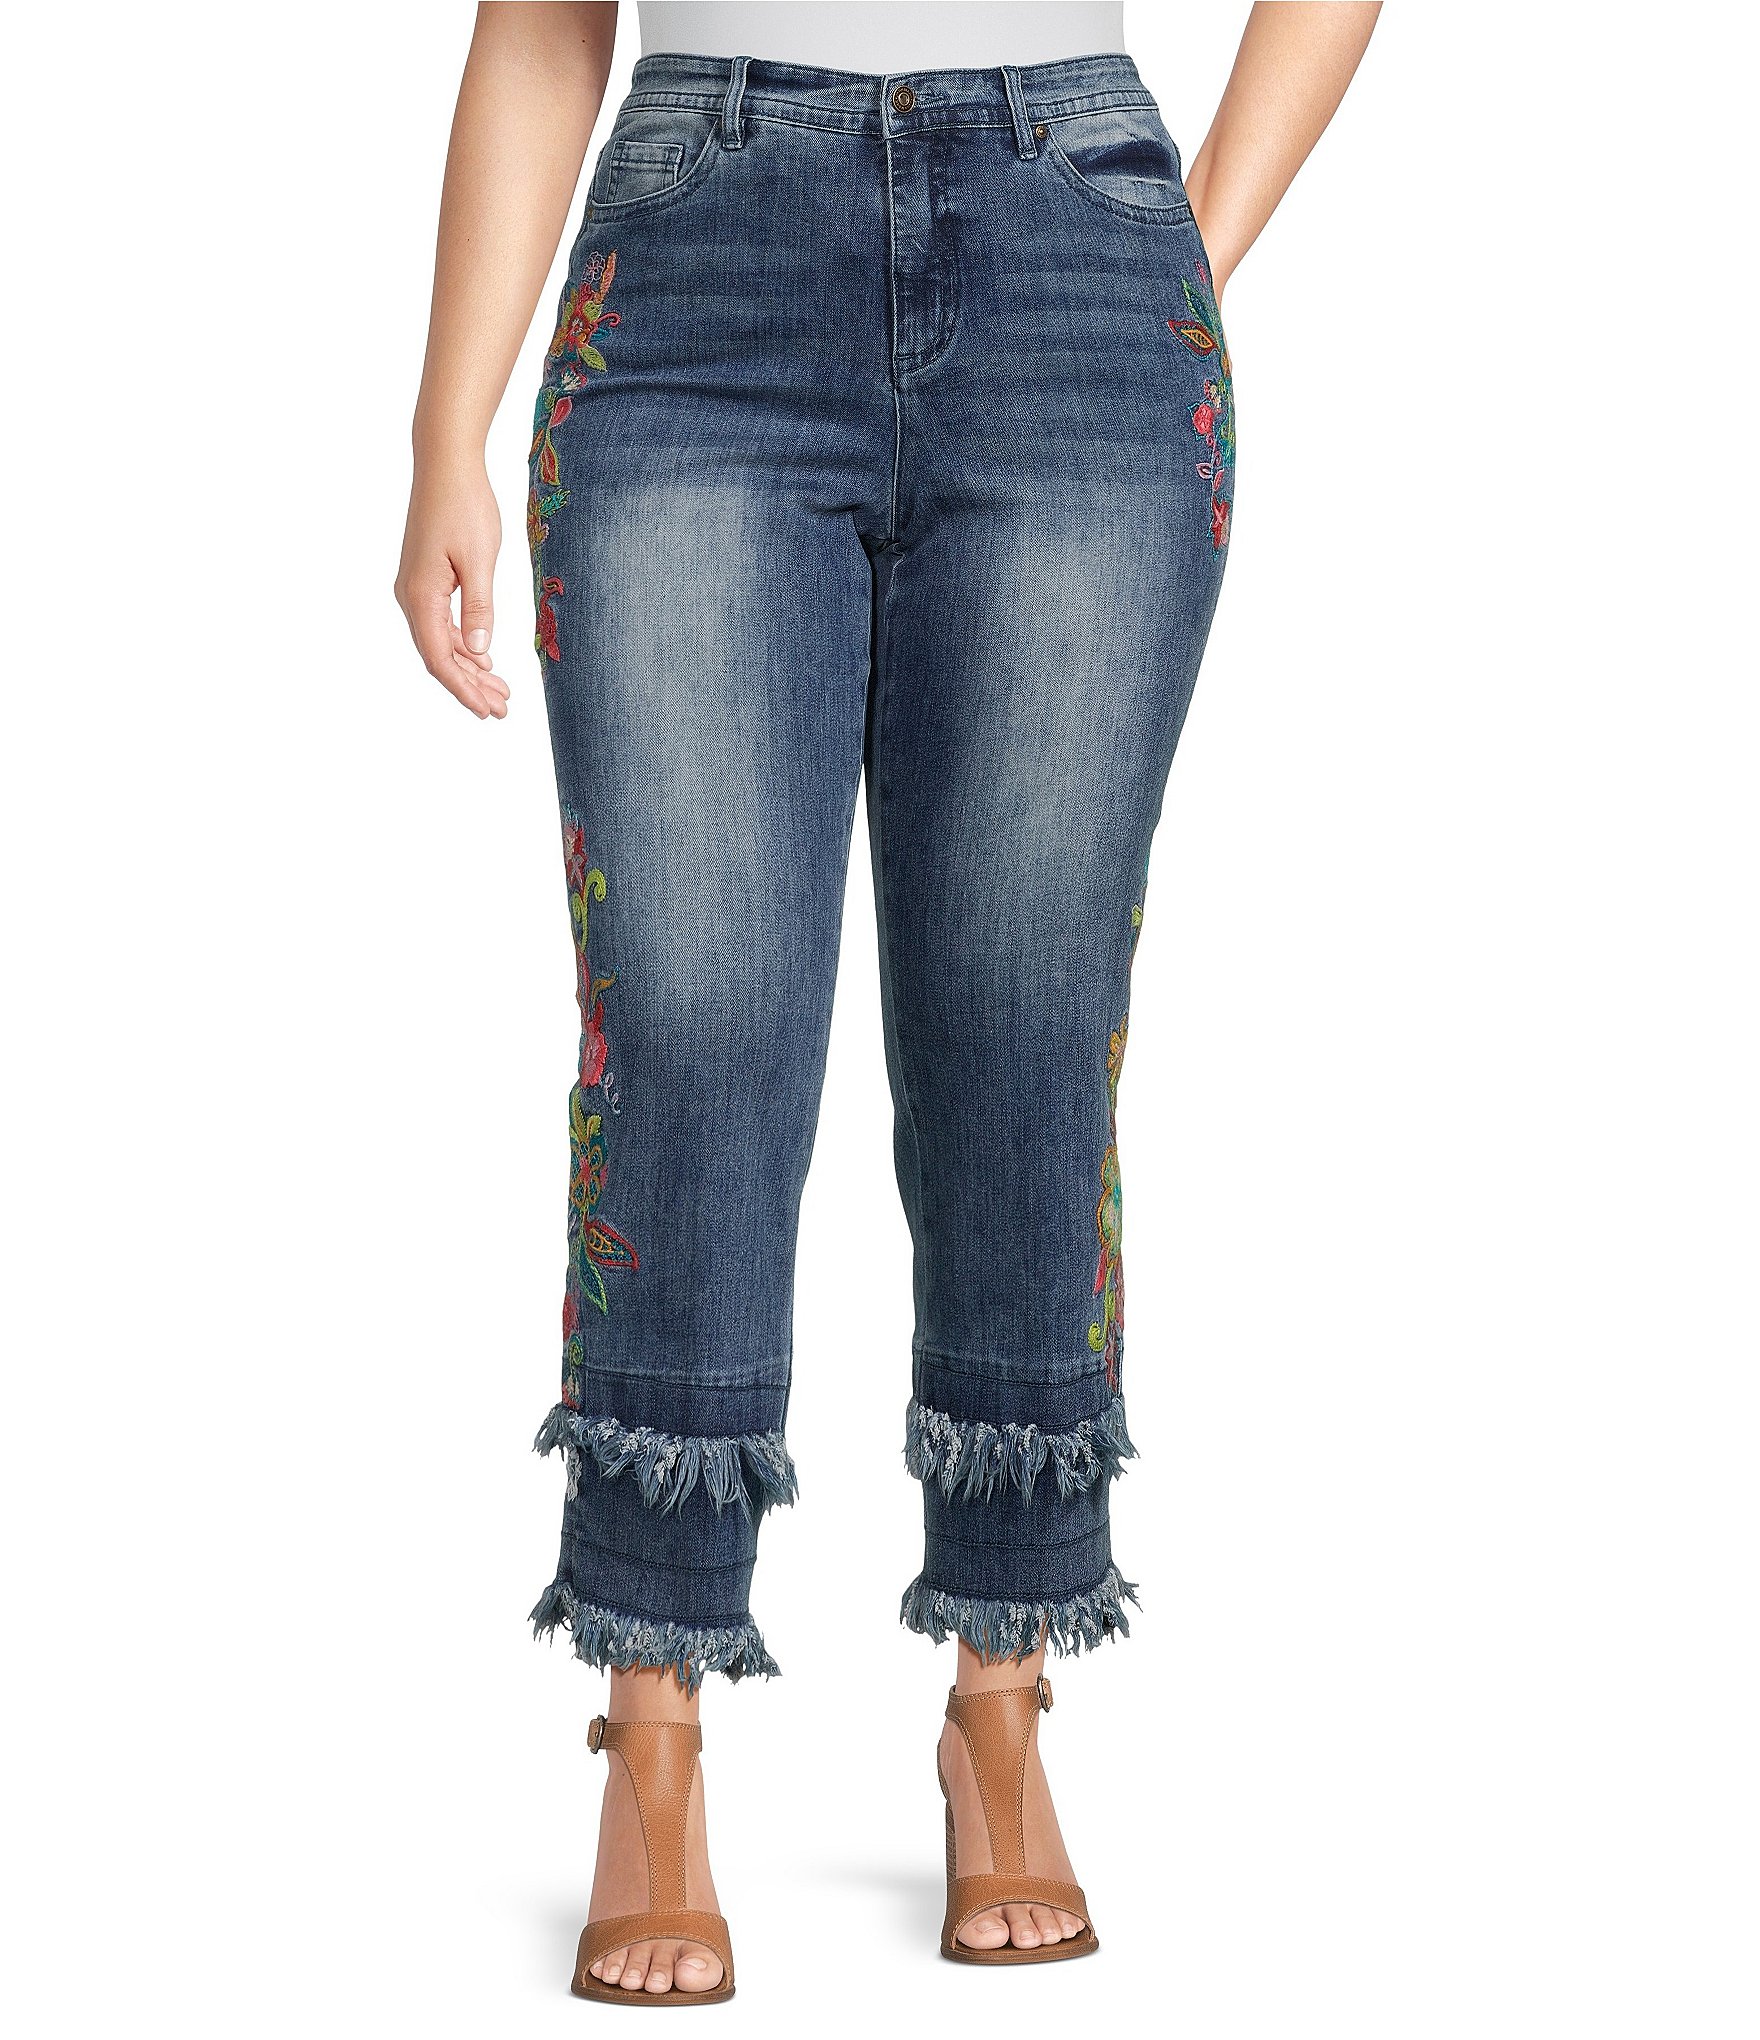 Hippie Girl Big Girls 7-16 High-Rise Embroidered Pocket Flare Jeans |  Dillard's